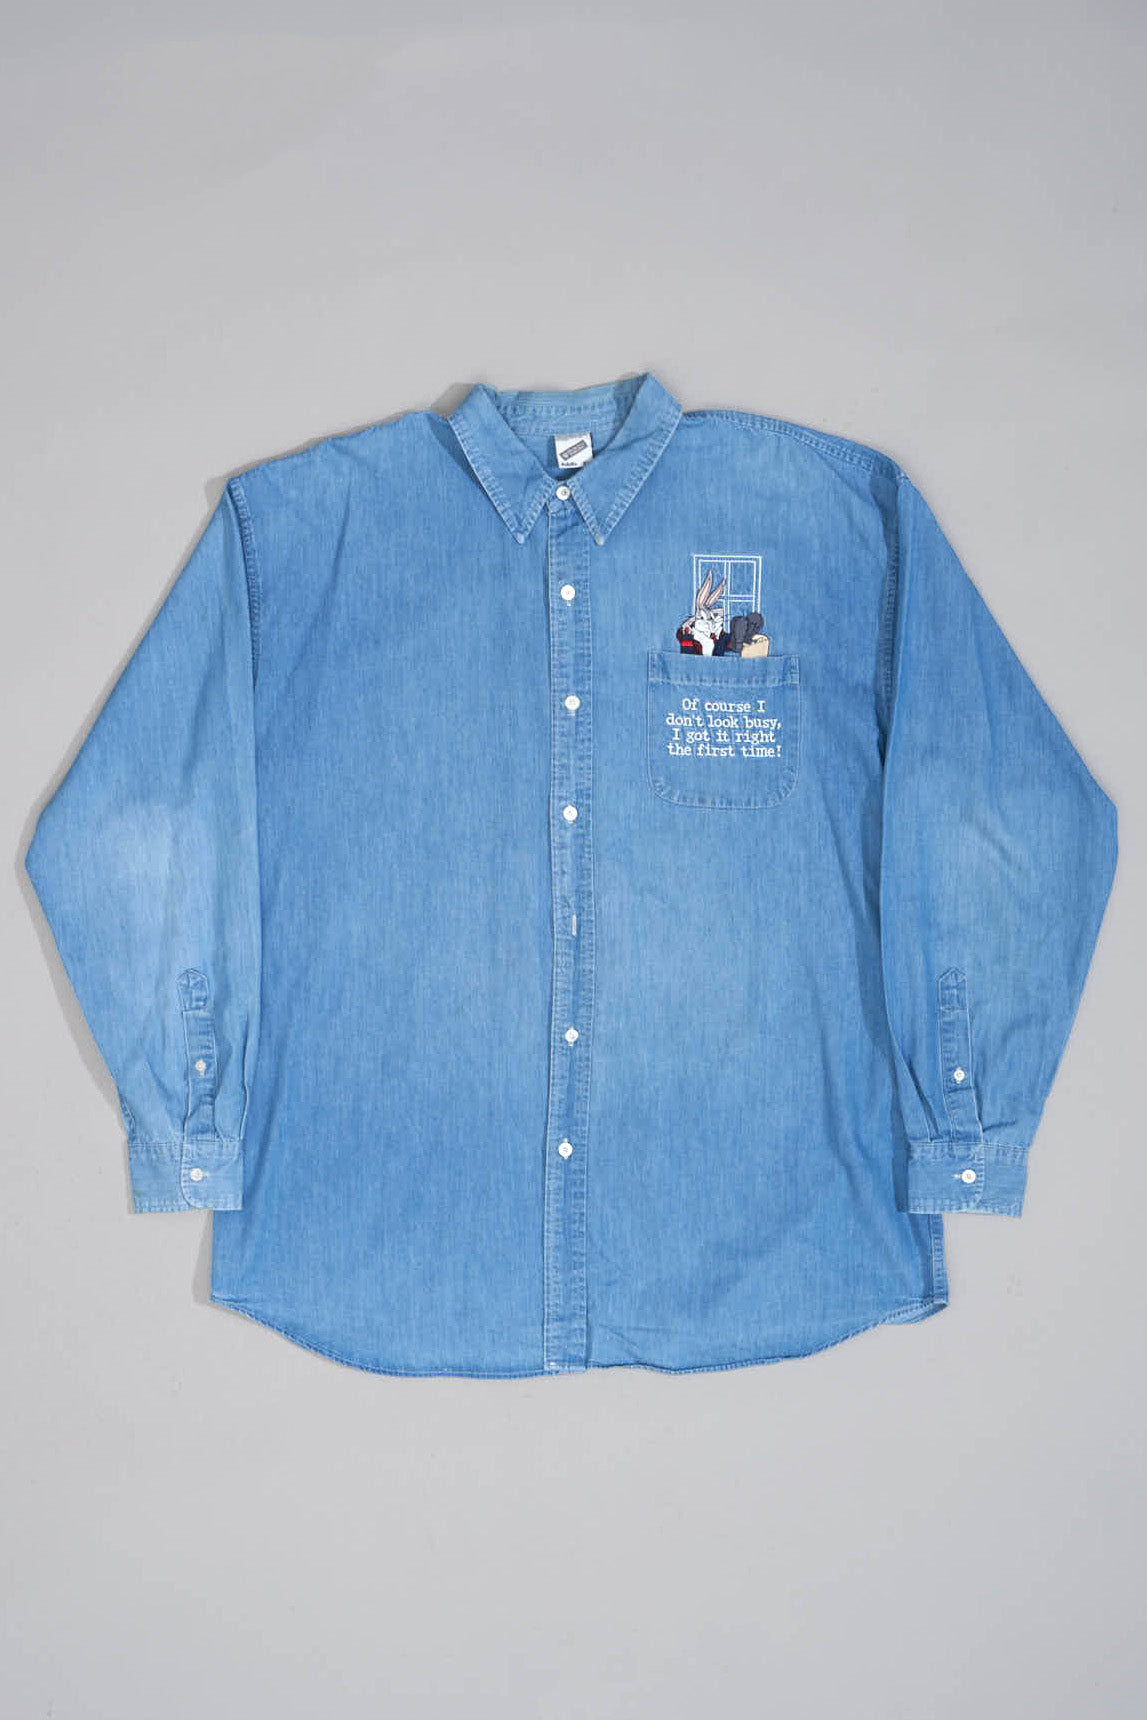 'OF COURSE I DON'T LOOK BUSY' DENIM Shirt - XXL